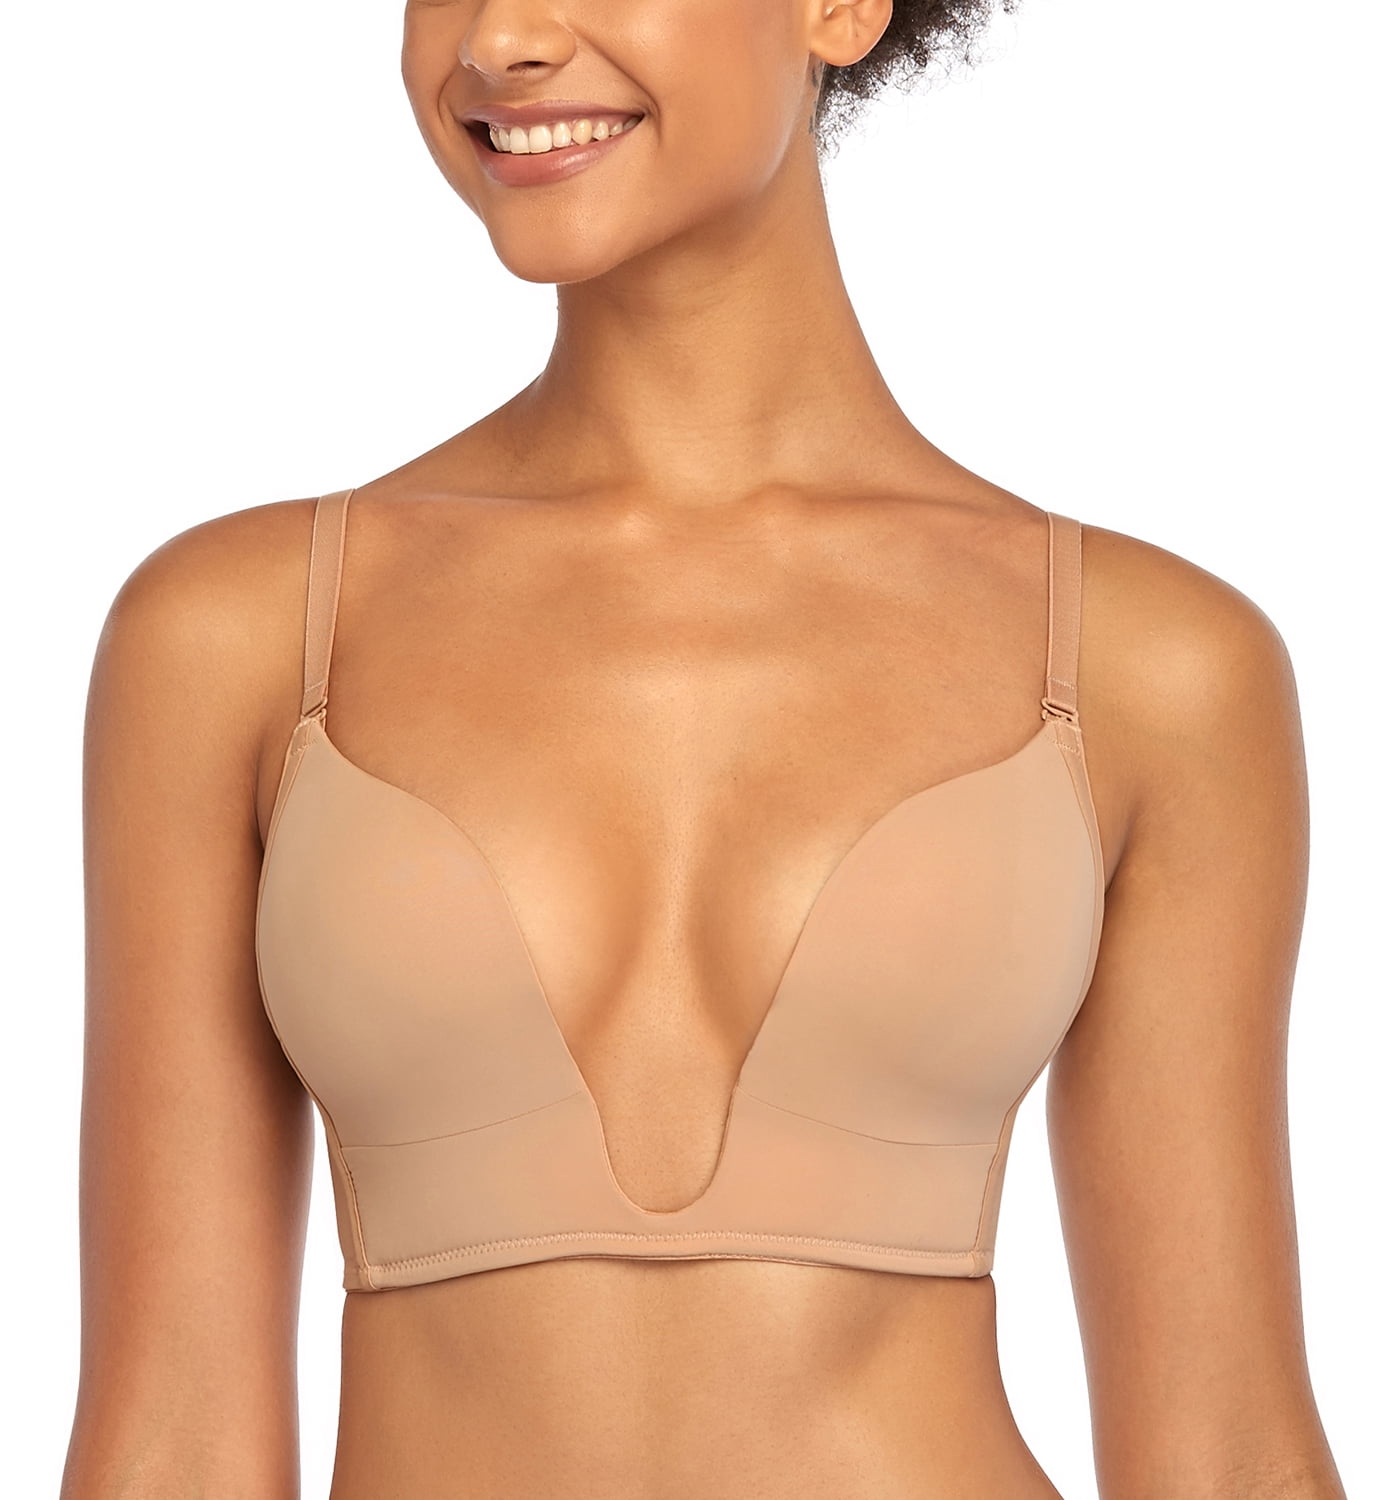 Exclare Women's Deep Plunge Bra Convertible Push up Low Cut